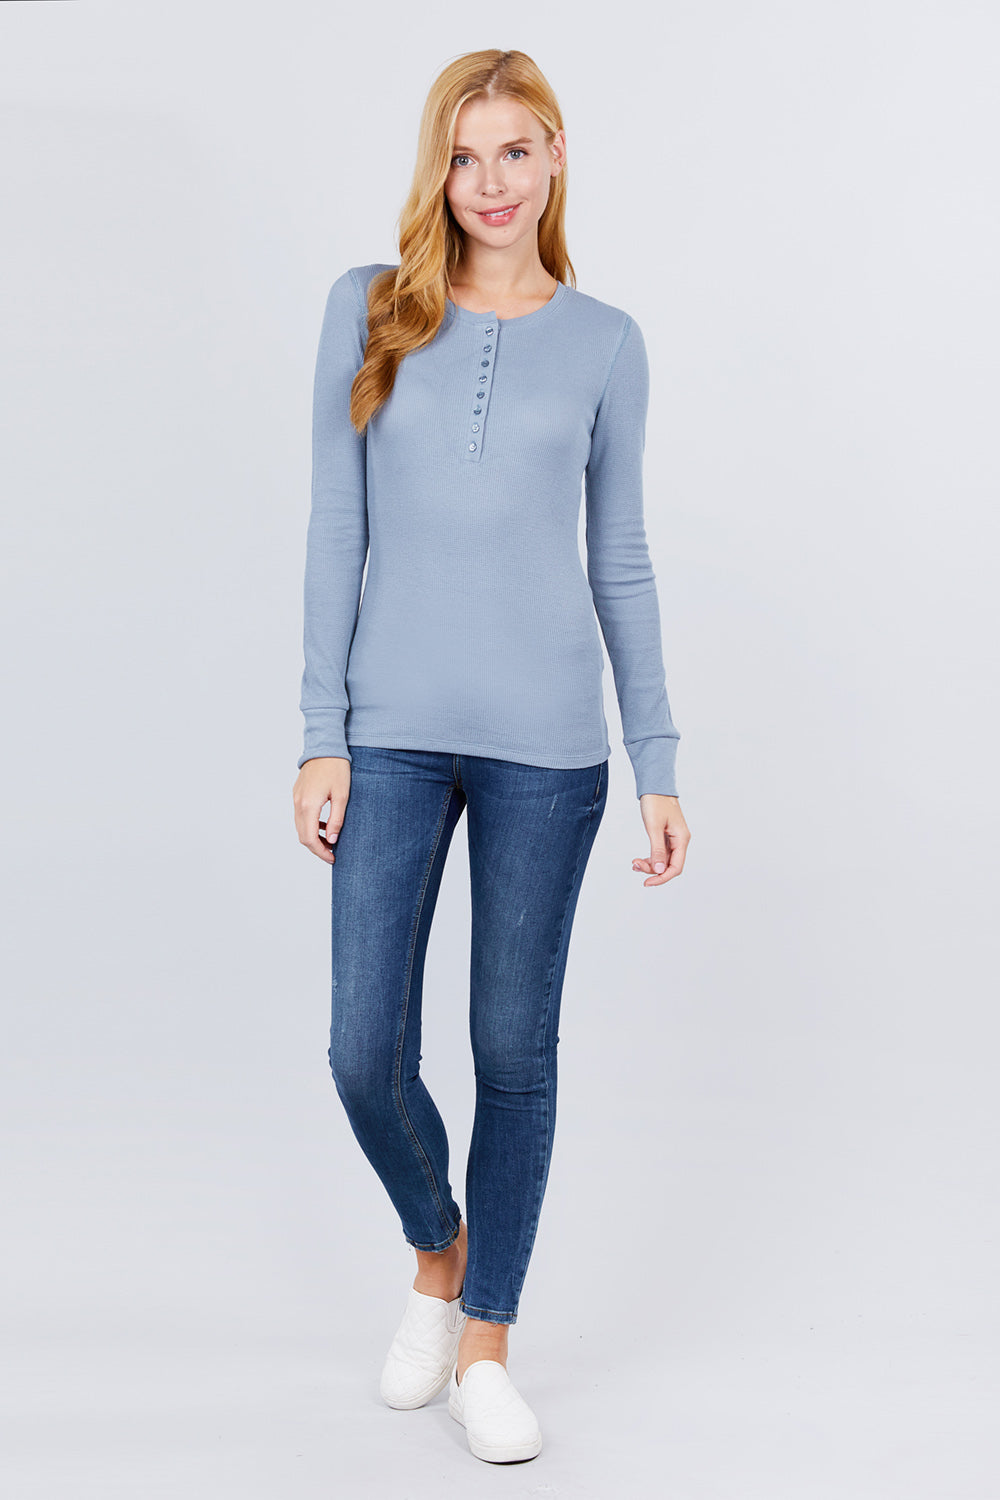 Blue Long Sleeve Waffle Knit Stretch Cotton Henley Thermal Top Shirt_ Shirts & Tops jehouze 